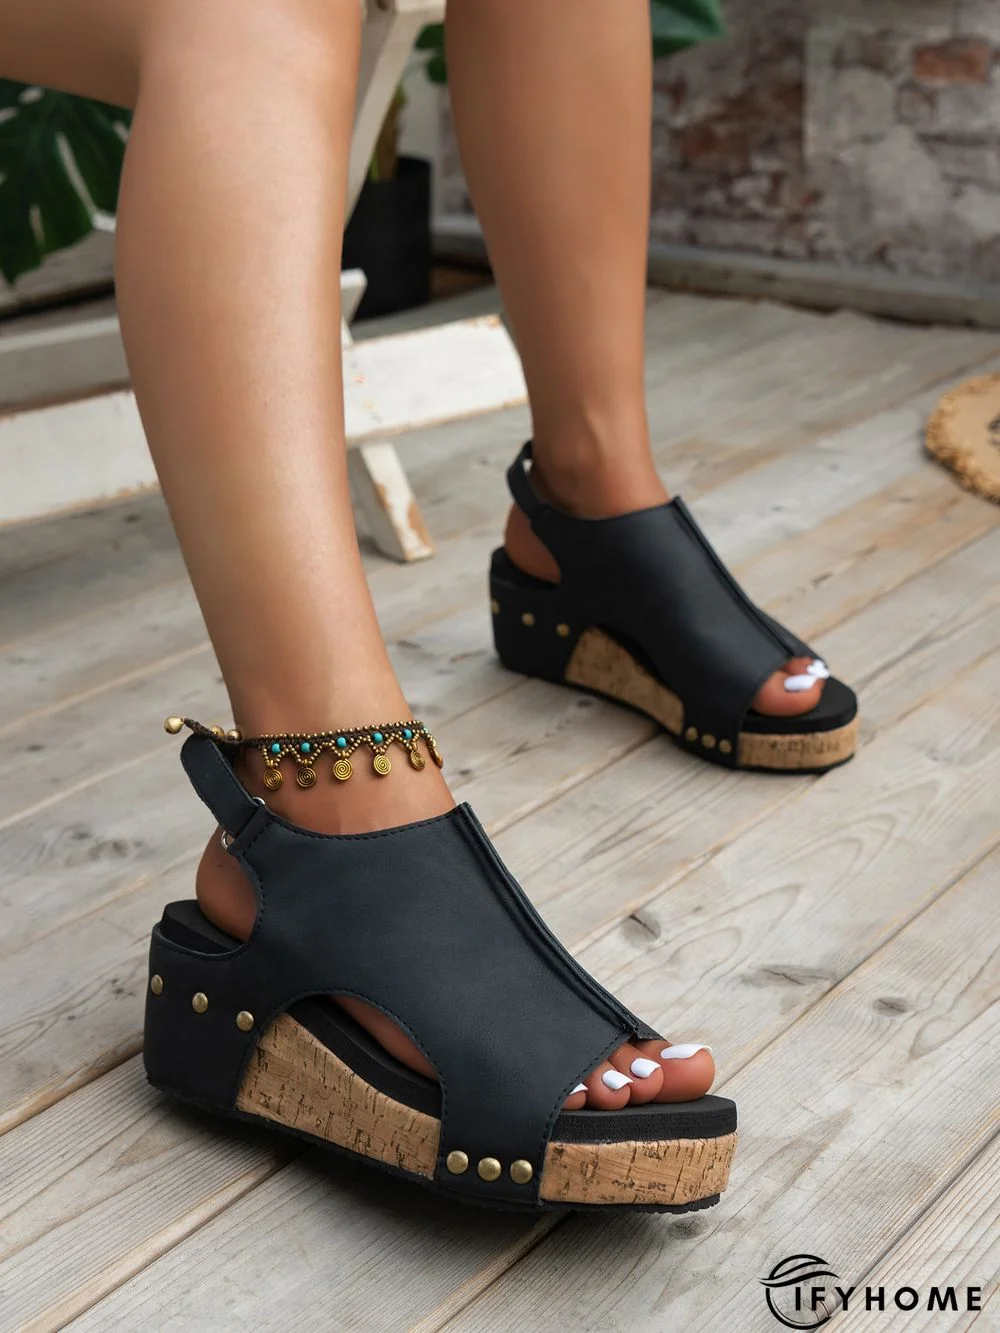 Black Vintage Leather Stitching Studded Wedge Sandals | IFYHOME